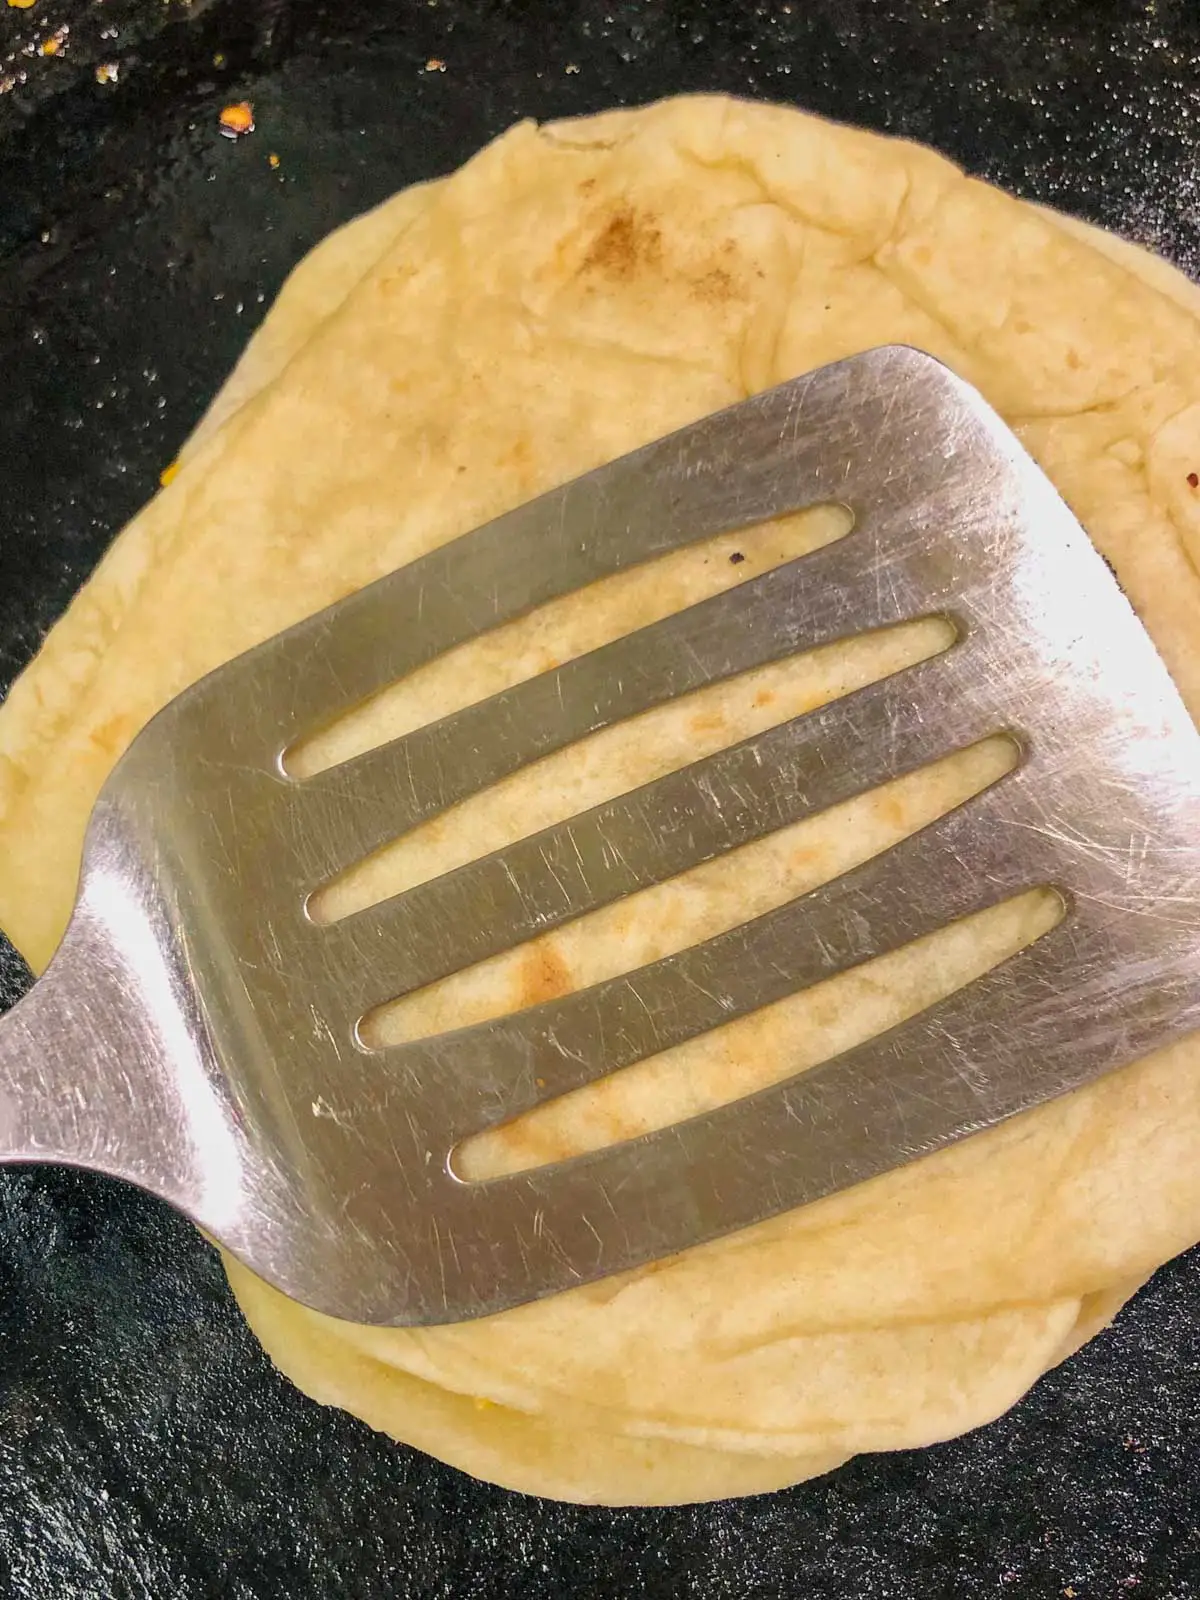 A metal spatula pressed down on a flour tortilla in a cast iron pan.